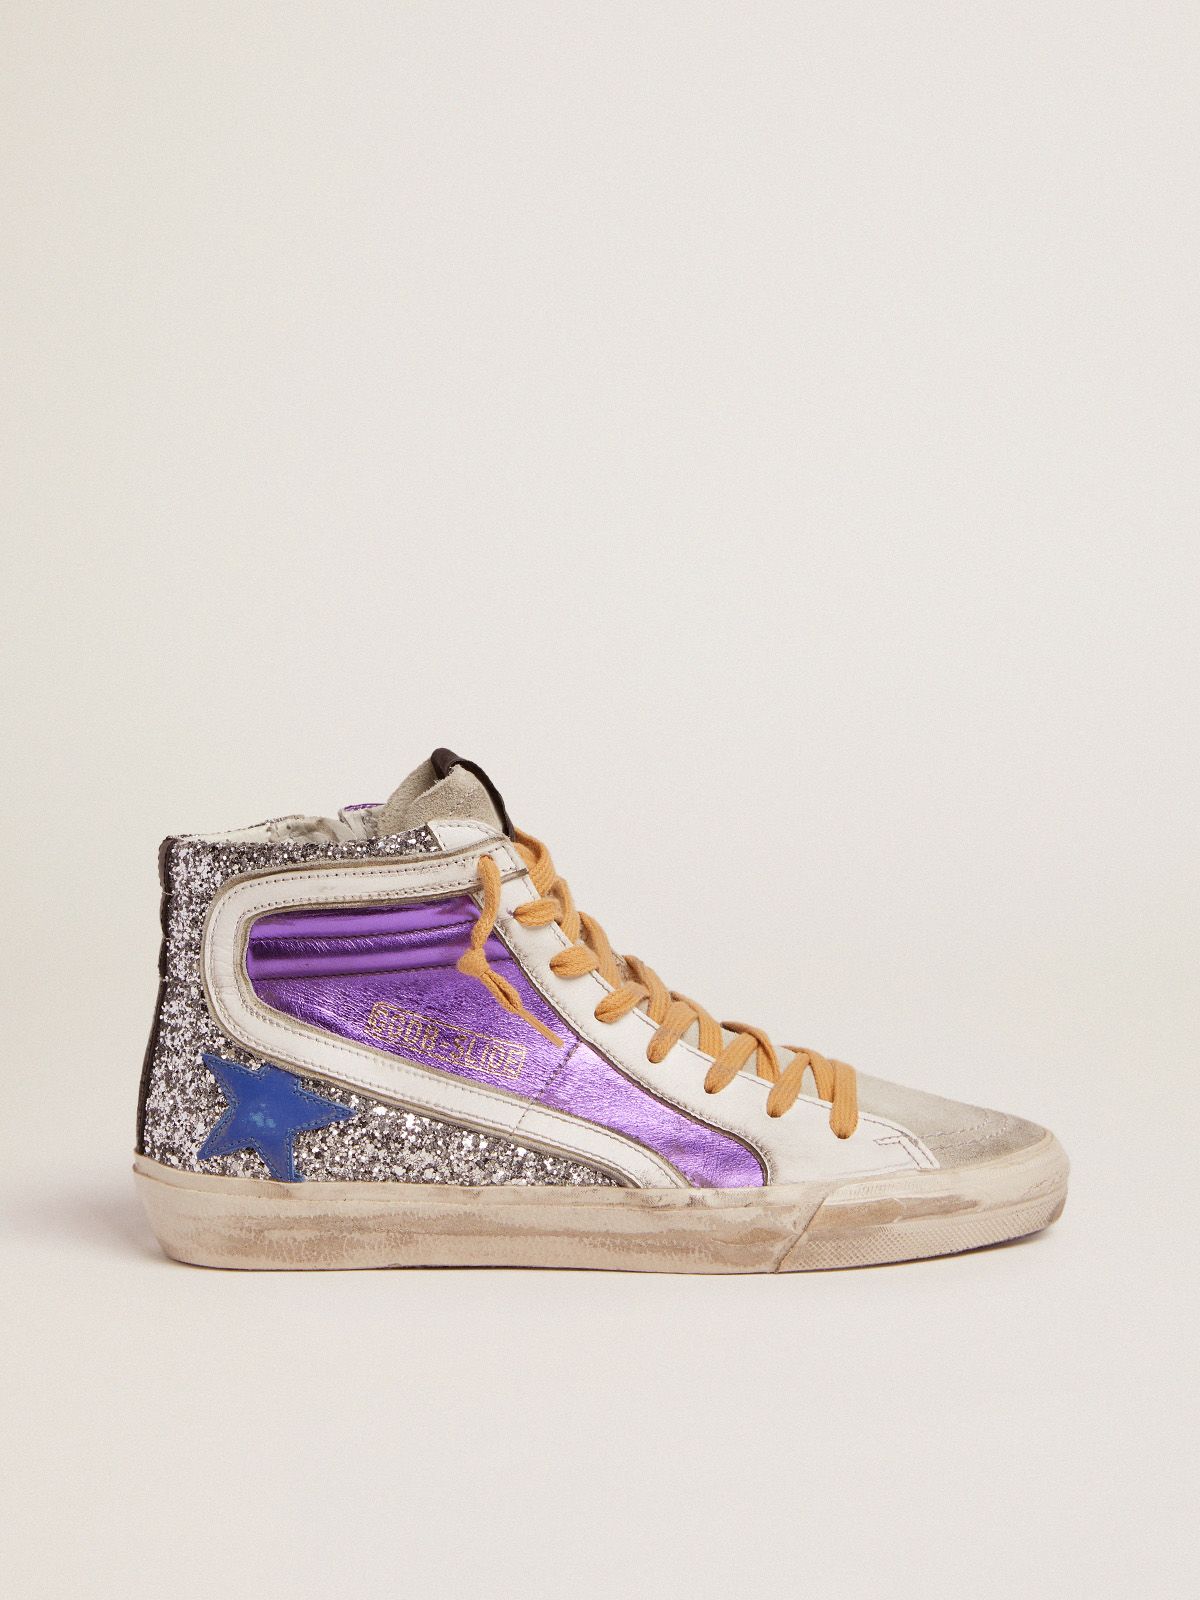 golden goose upper leather glitter sneakers Slide silver laminated and purple with